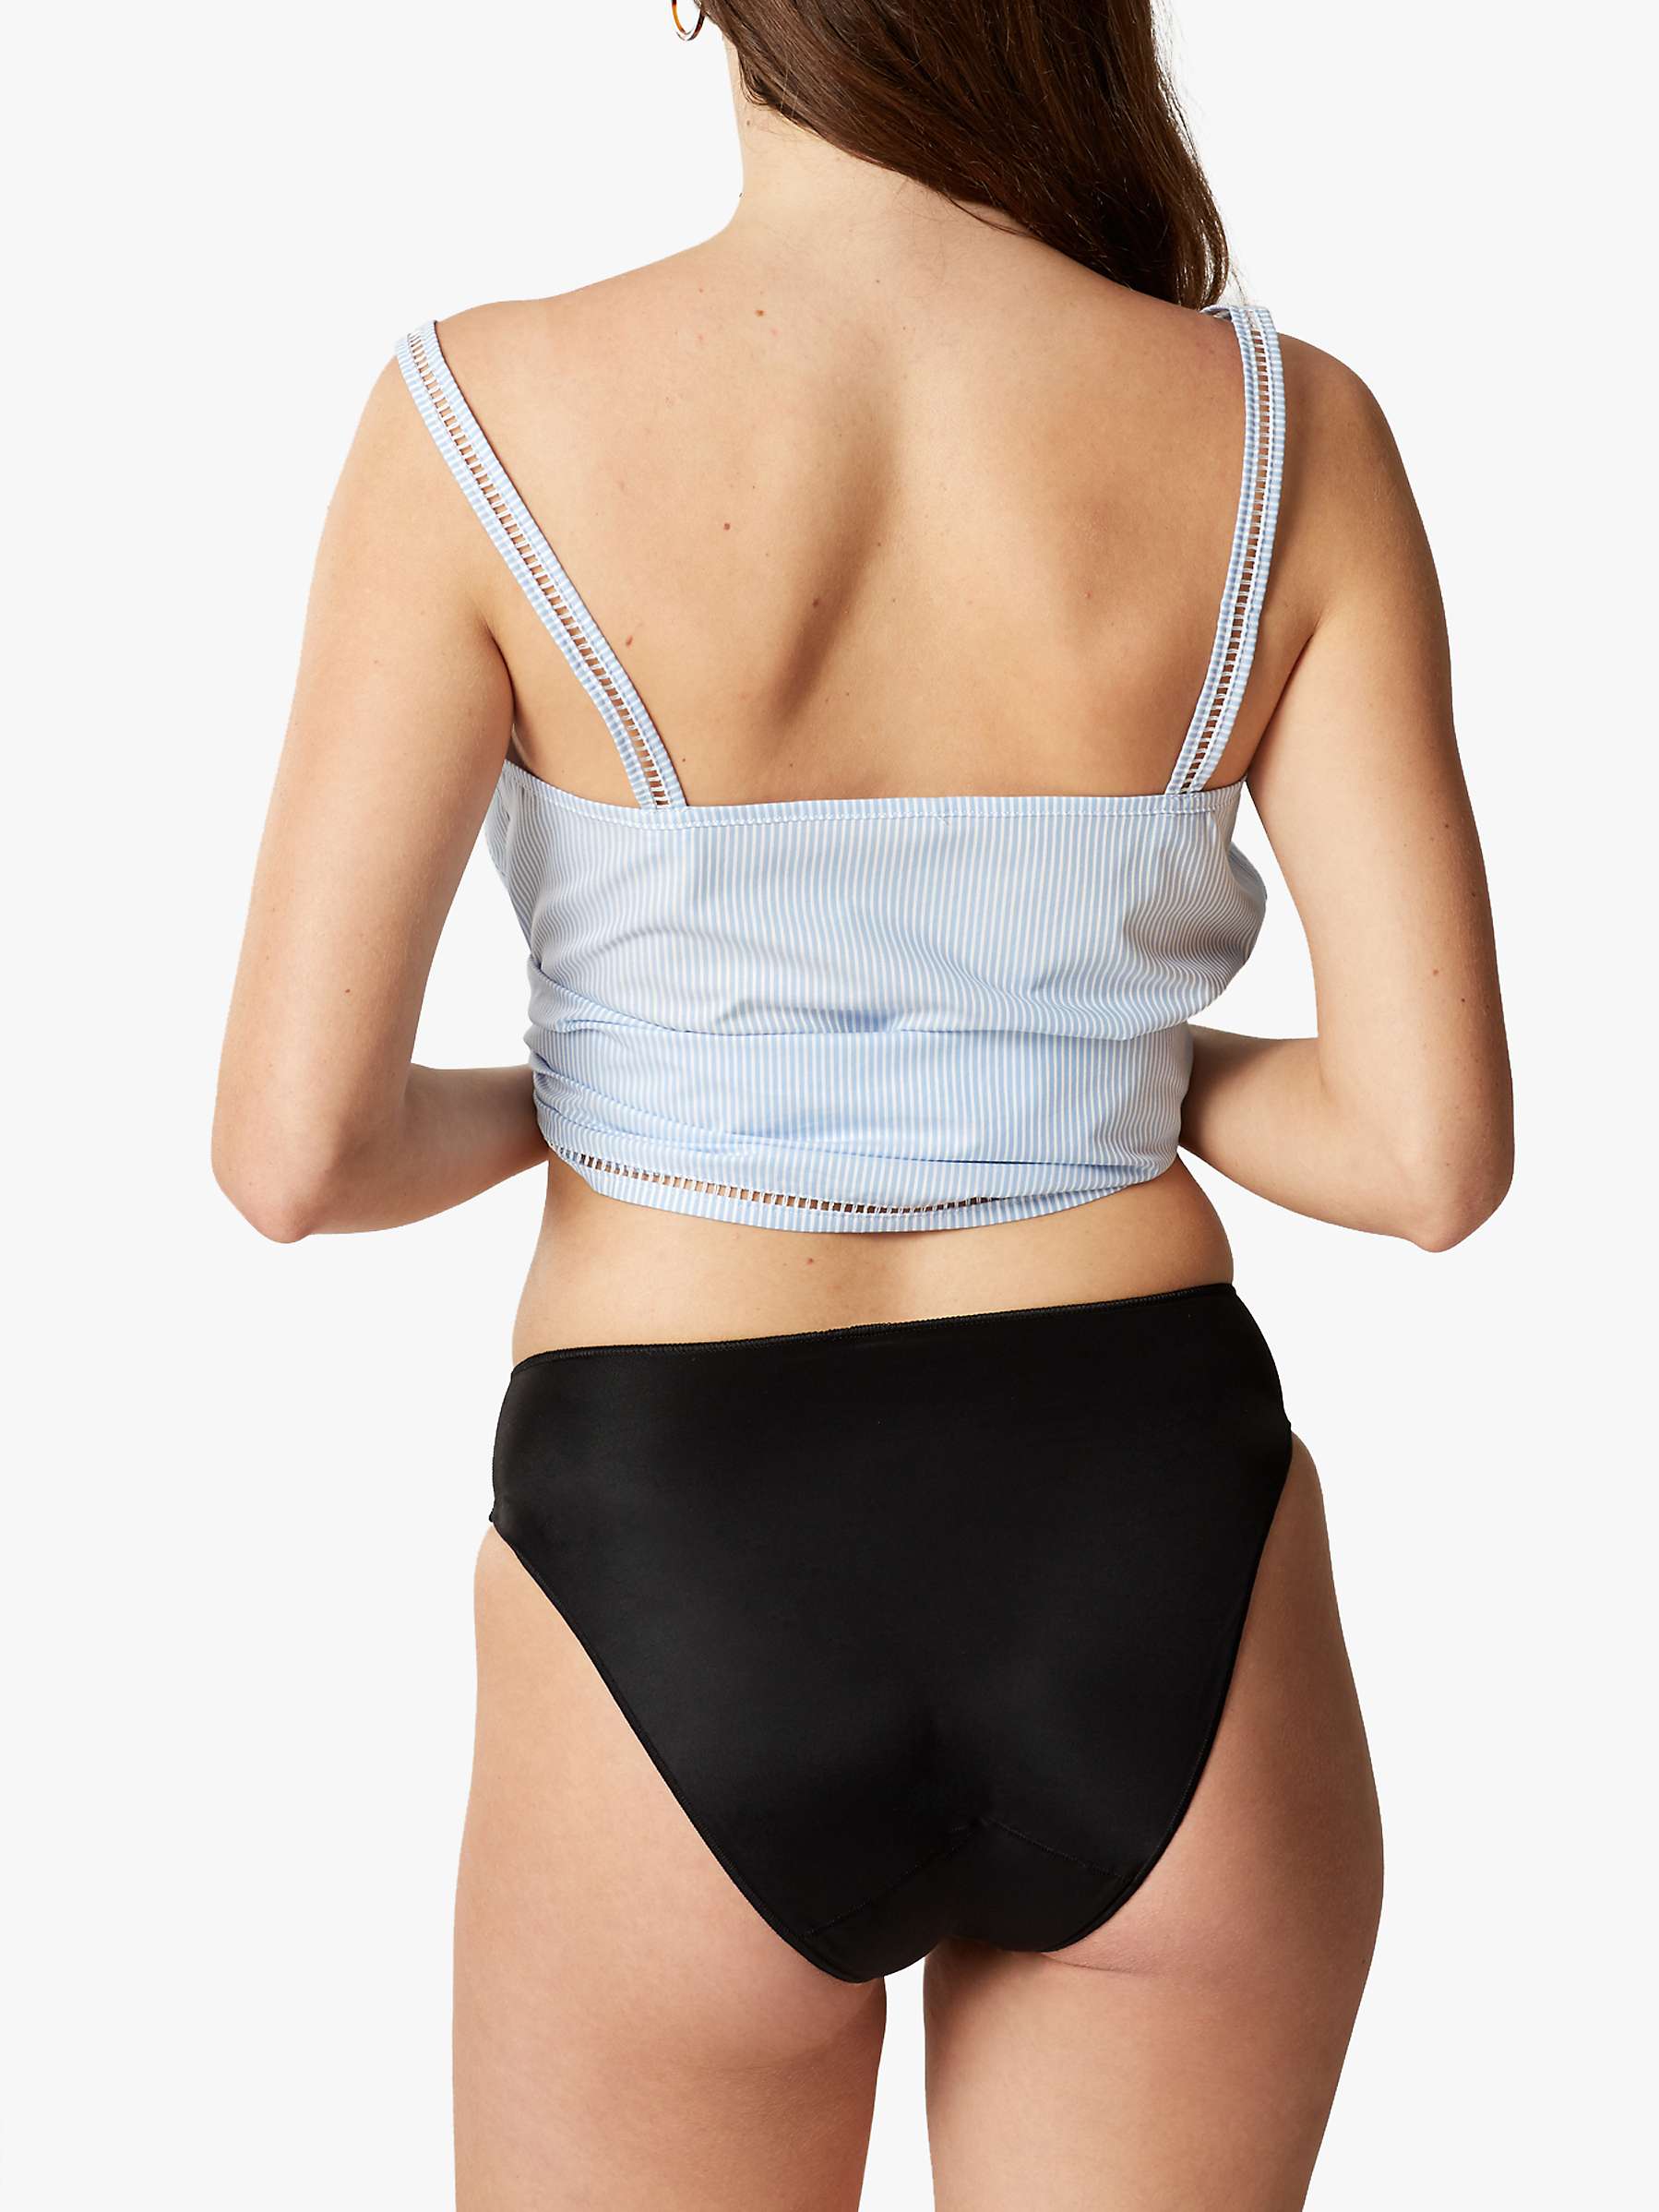 Buy Maison Lejaby Les Invisibles High Waisted Briefs Online at johnlewis.com